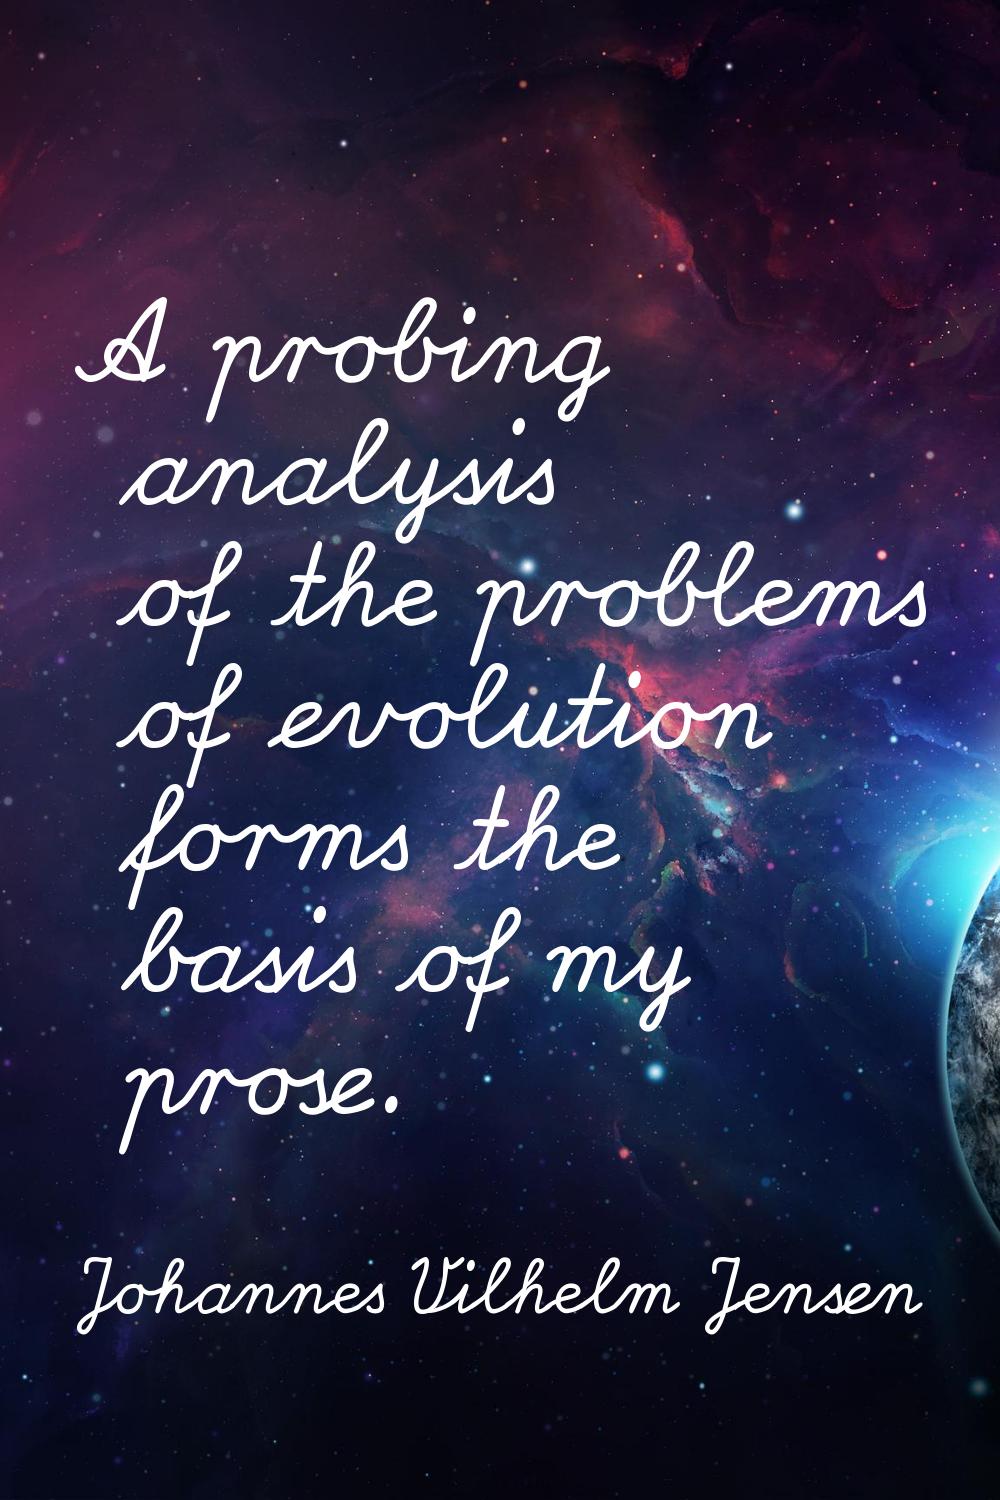 A probing analysis of the problems of evolution forms the basis of my prose.